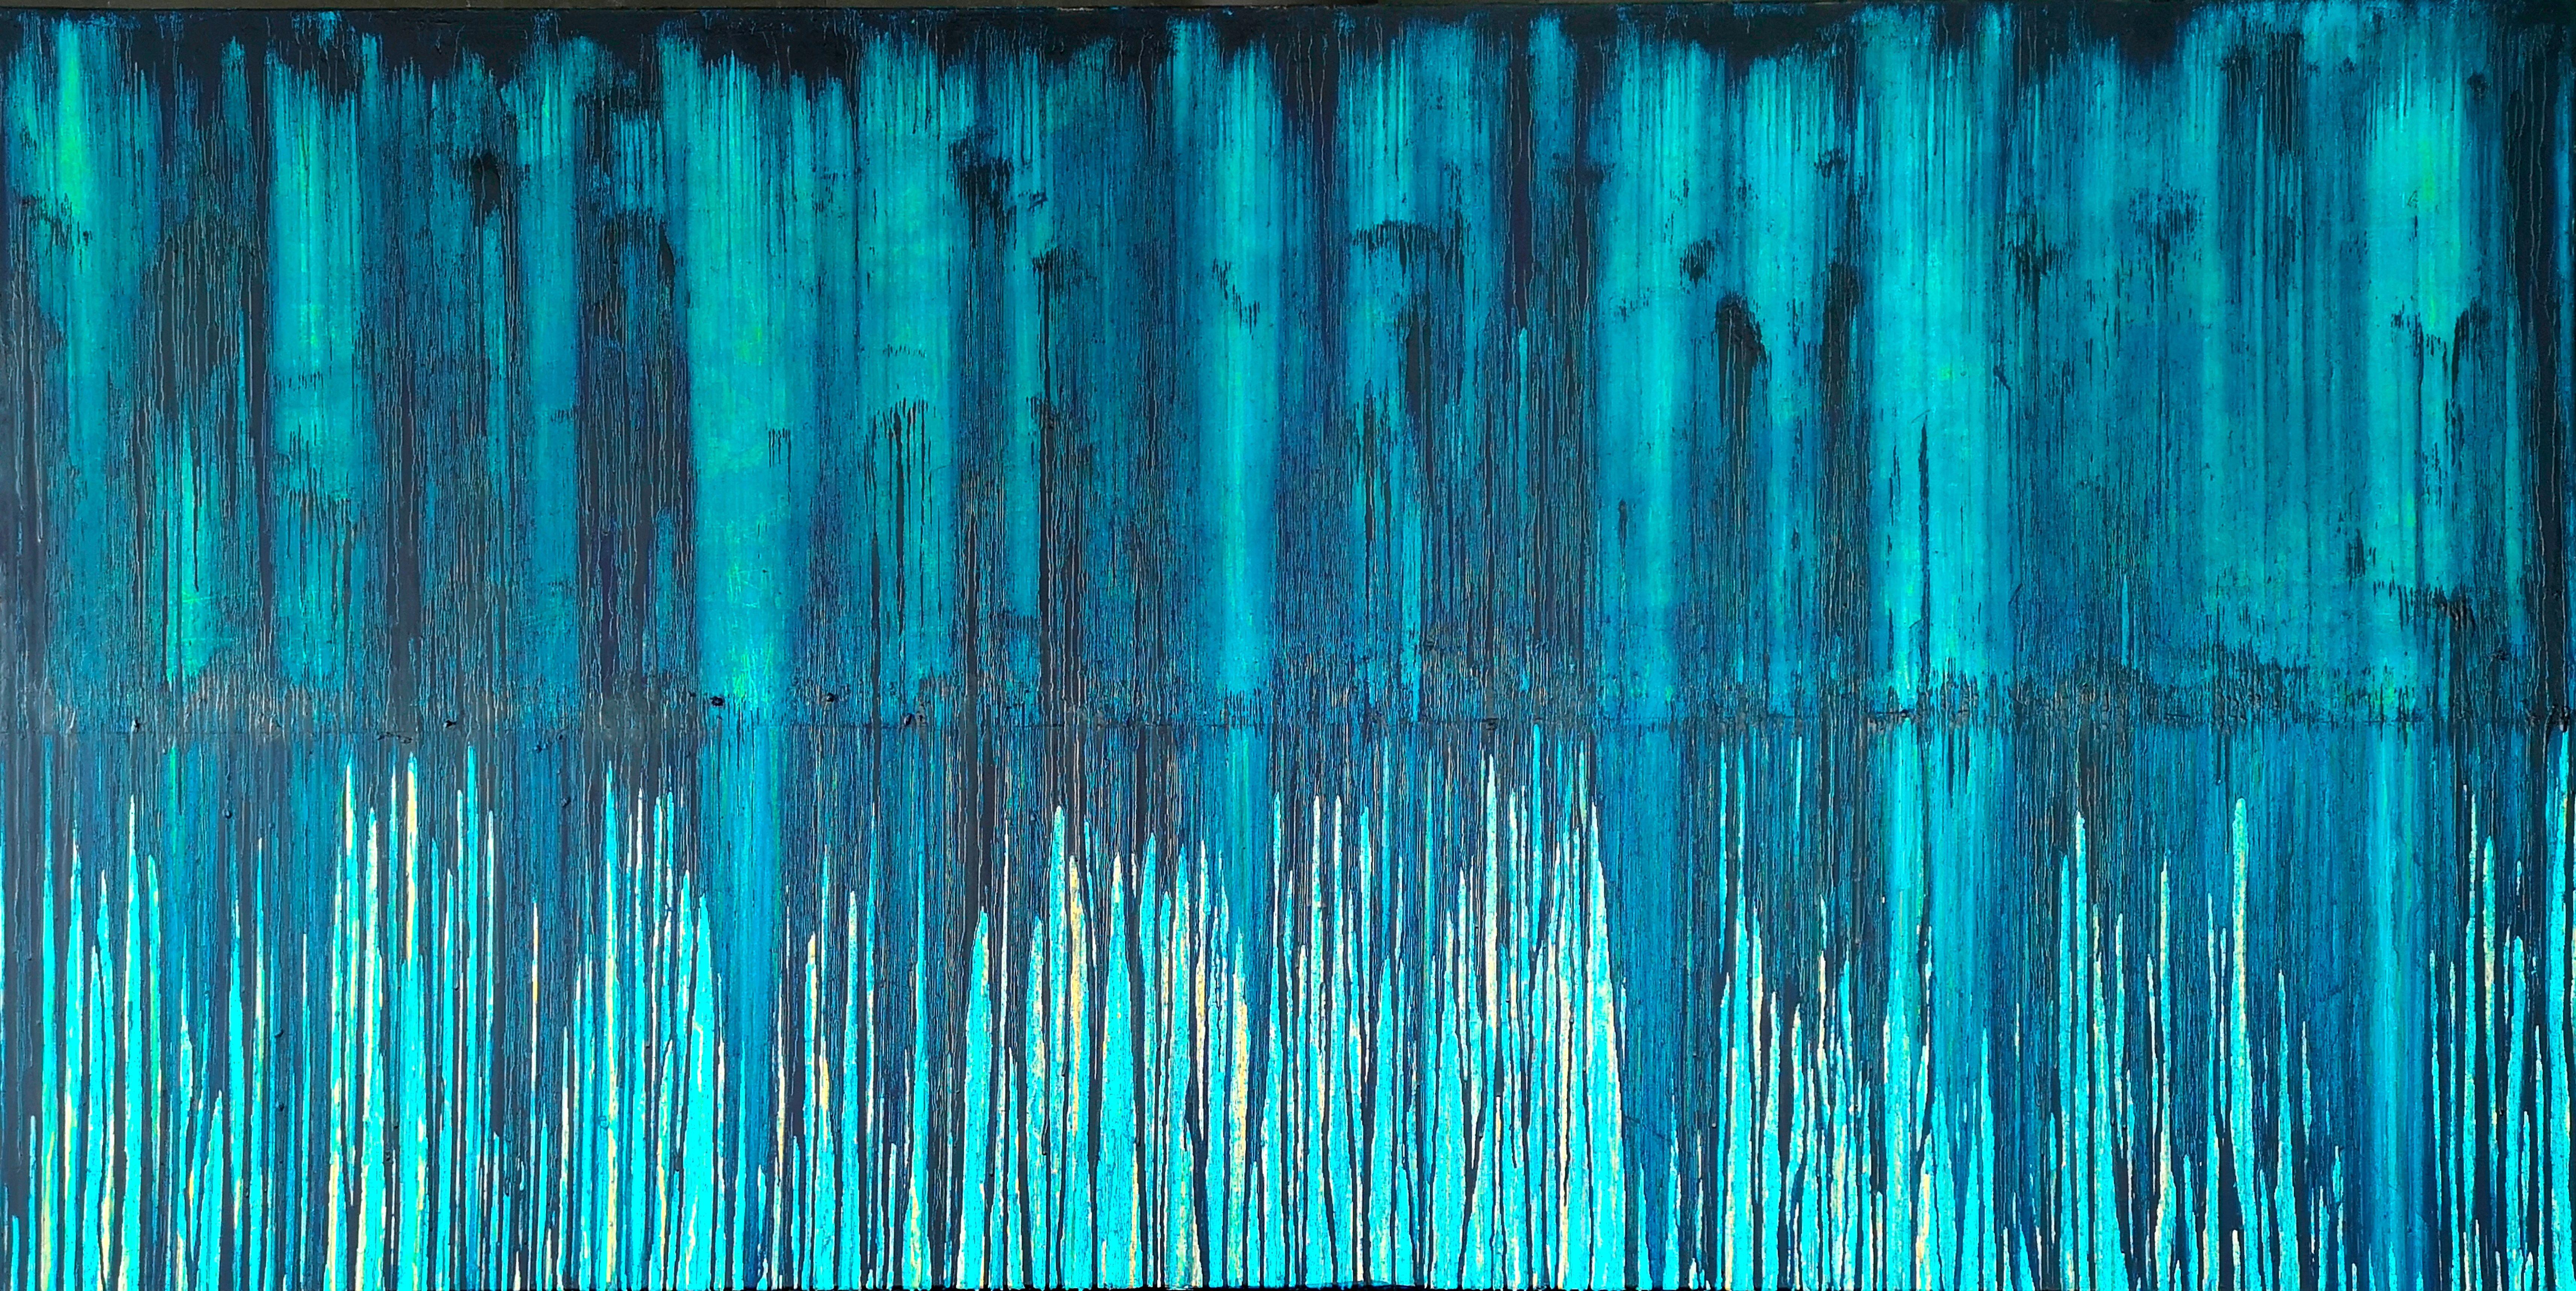 Carla Sá Fernandes Abstract Painting - The Emotional Creation #287, Painting, Acrylic on Canvas